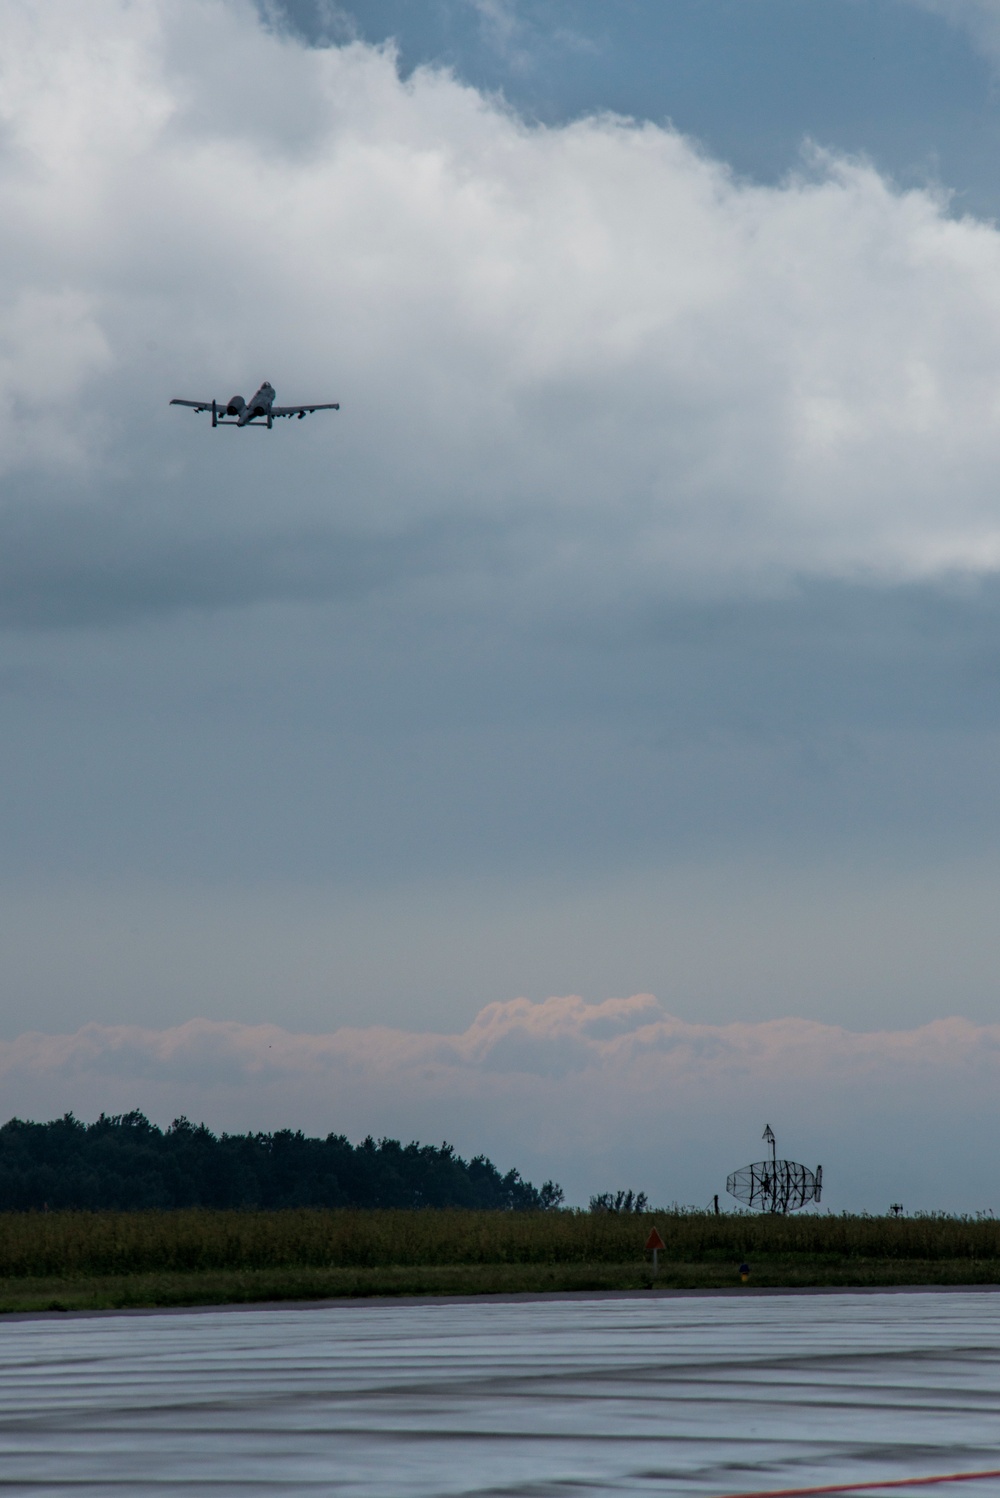 A-10s take to the skies in Poland